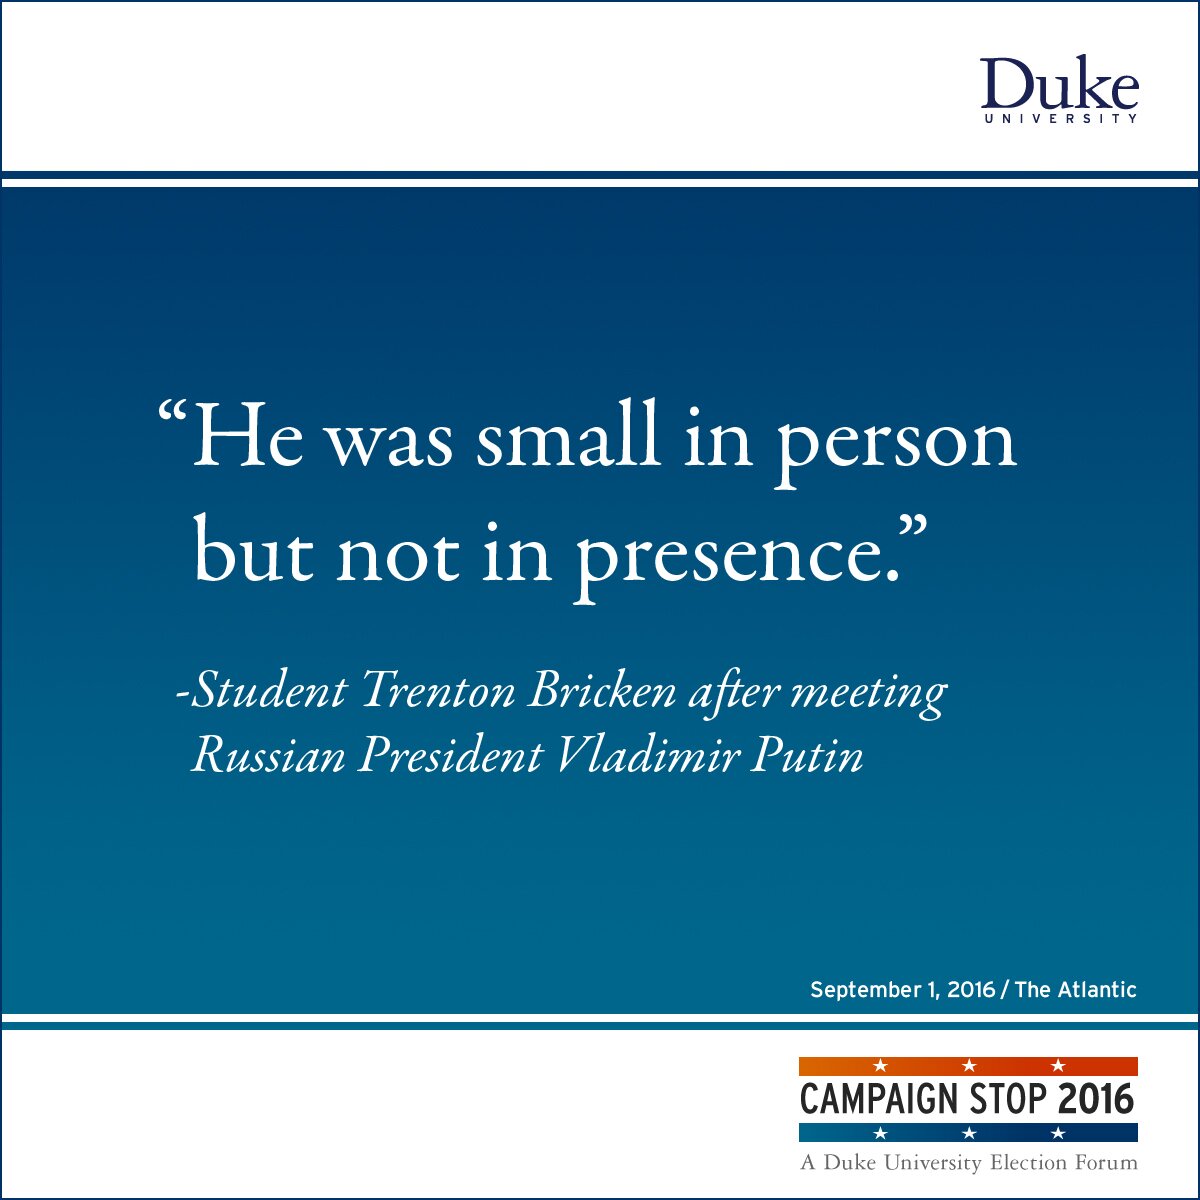 “He was small in person but not in presence.” -Student Trenton Bricken after meeting Russian President Vladimir Putin